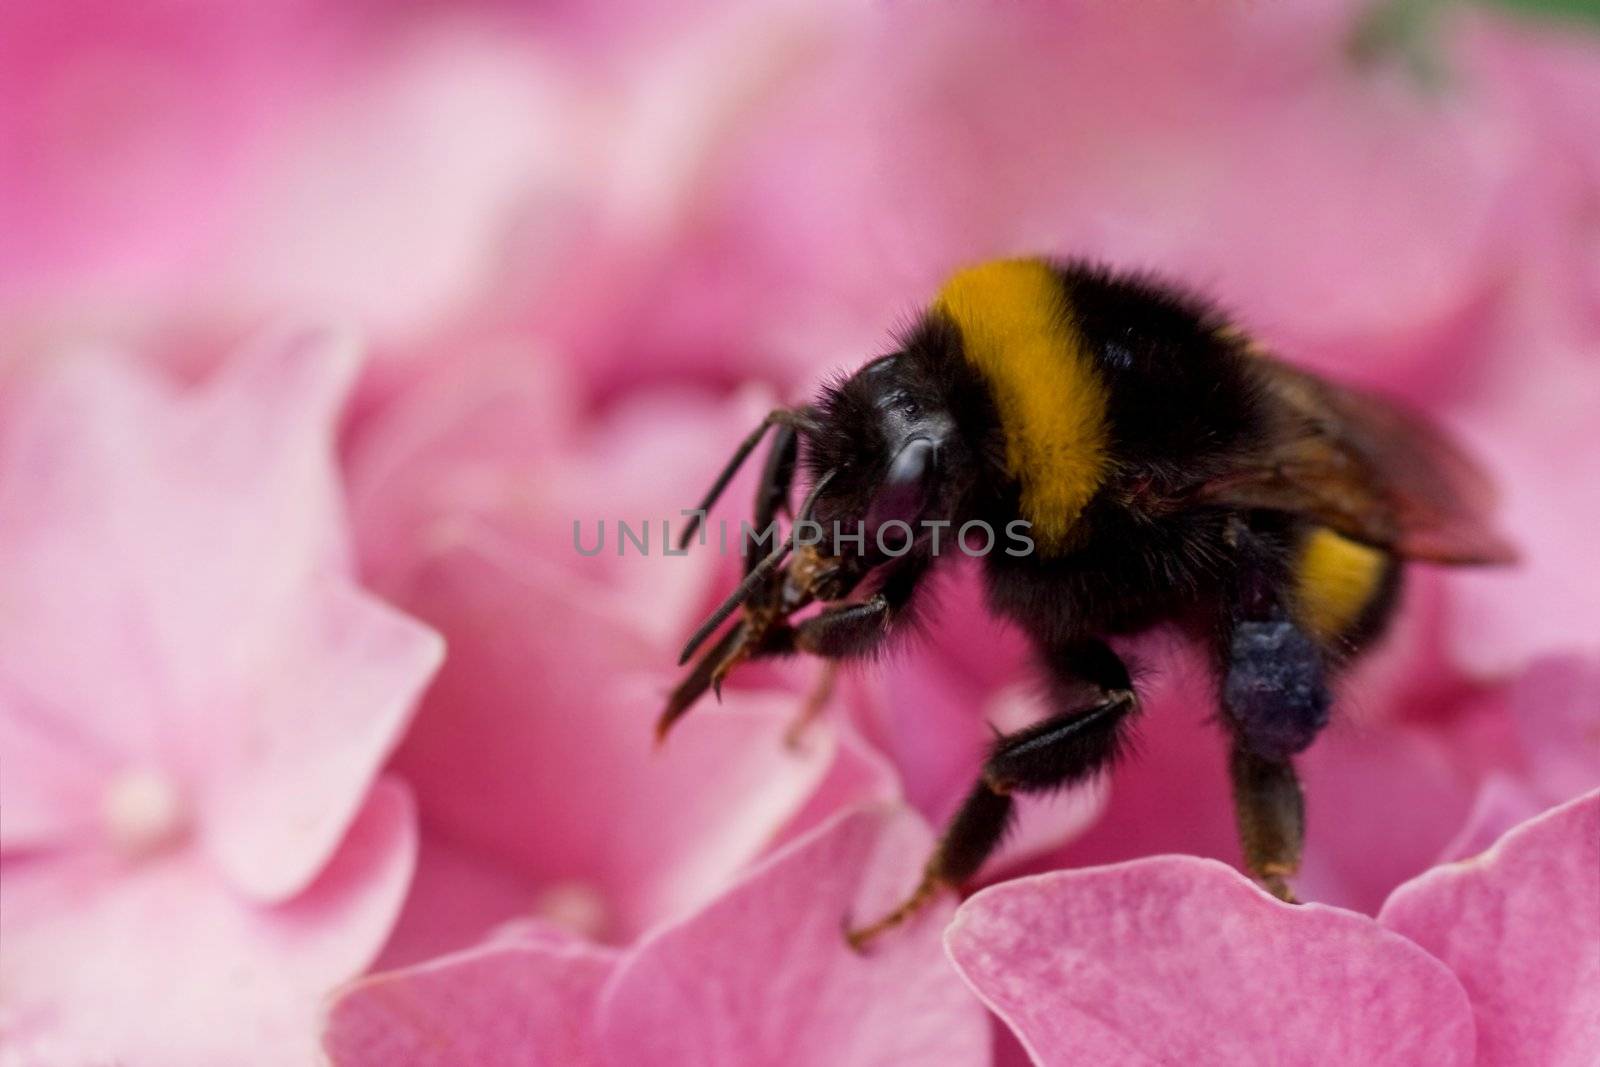 Bumble bee cleaning tongue from pollen by Colette